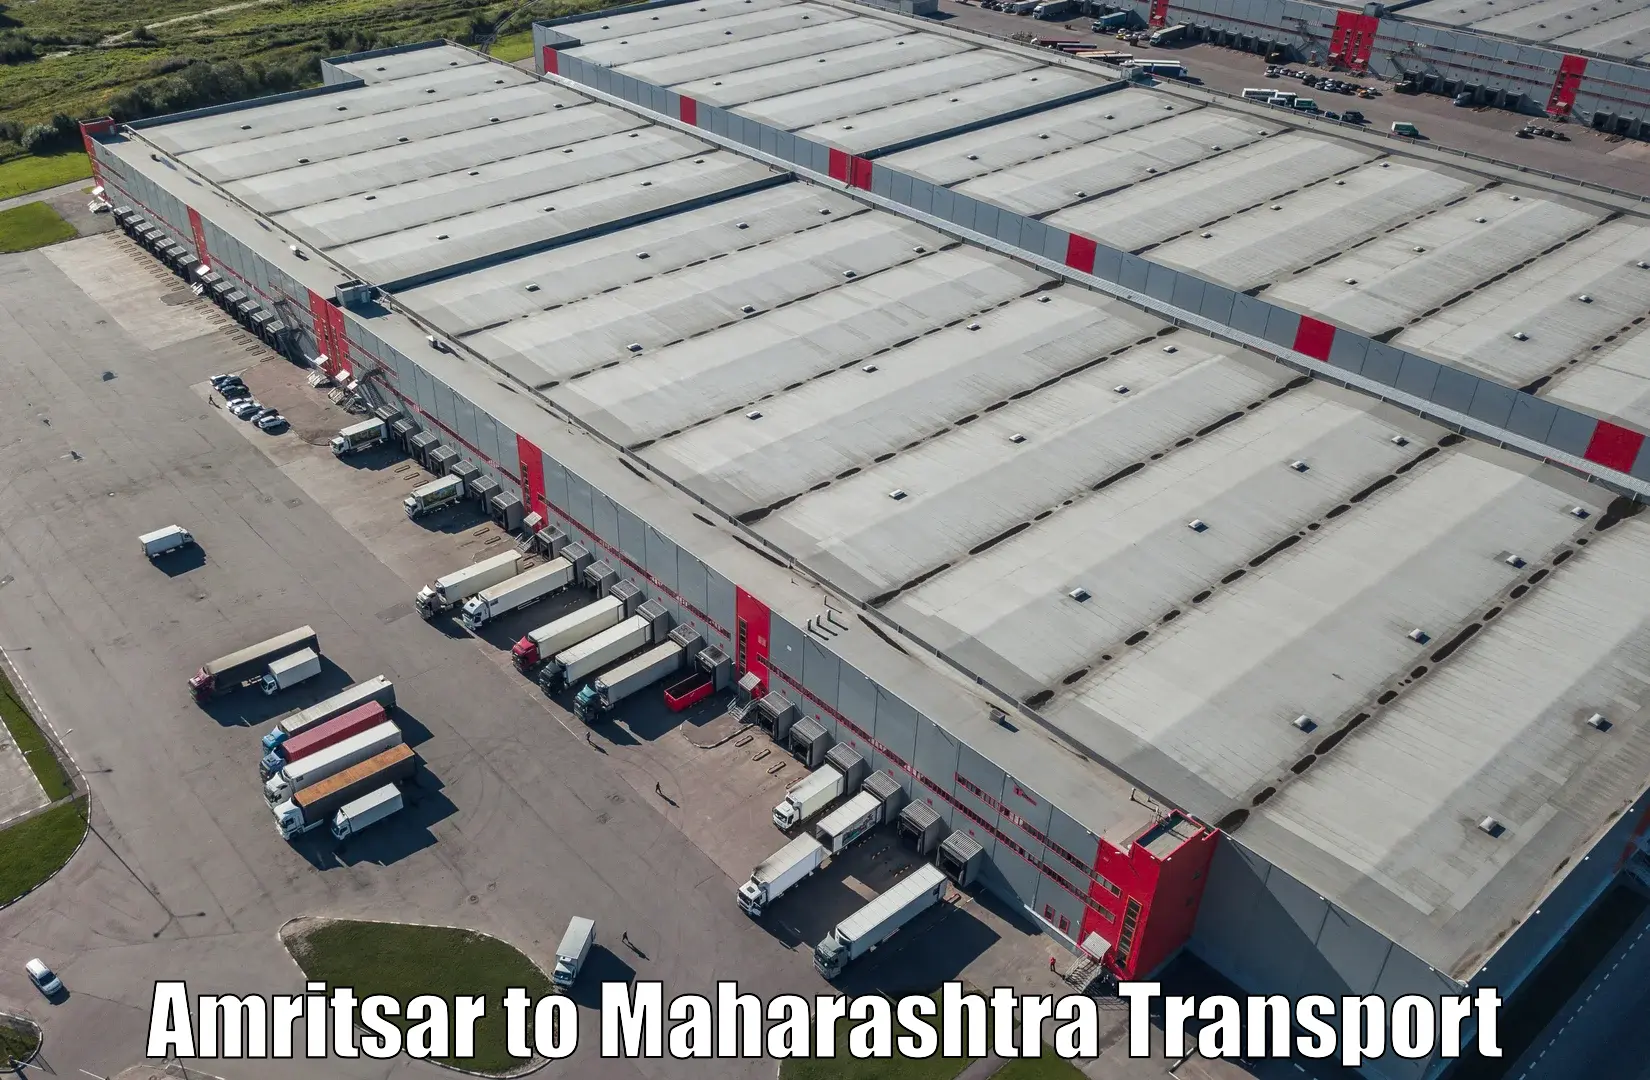 Air freight transport services in Amritsar to Pusad